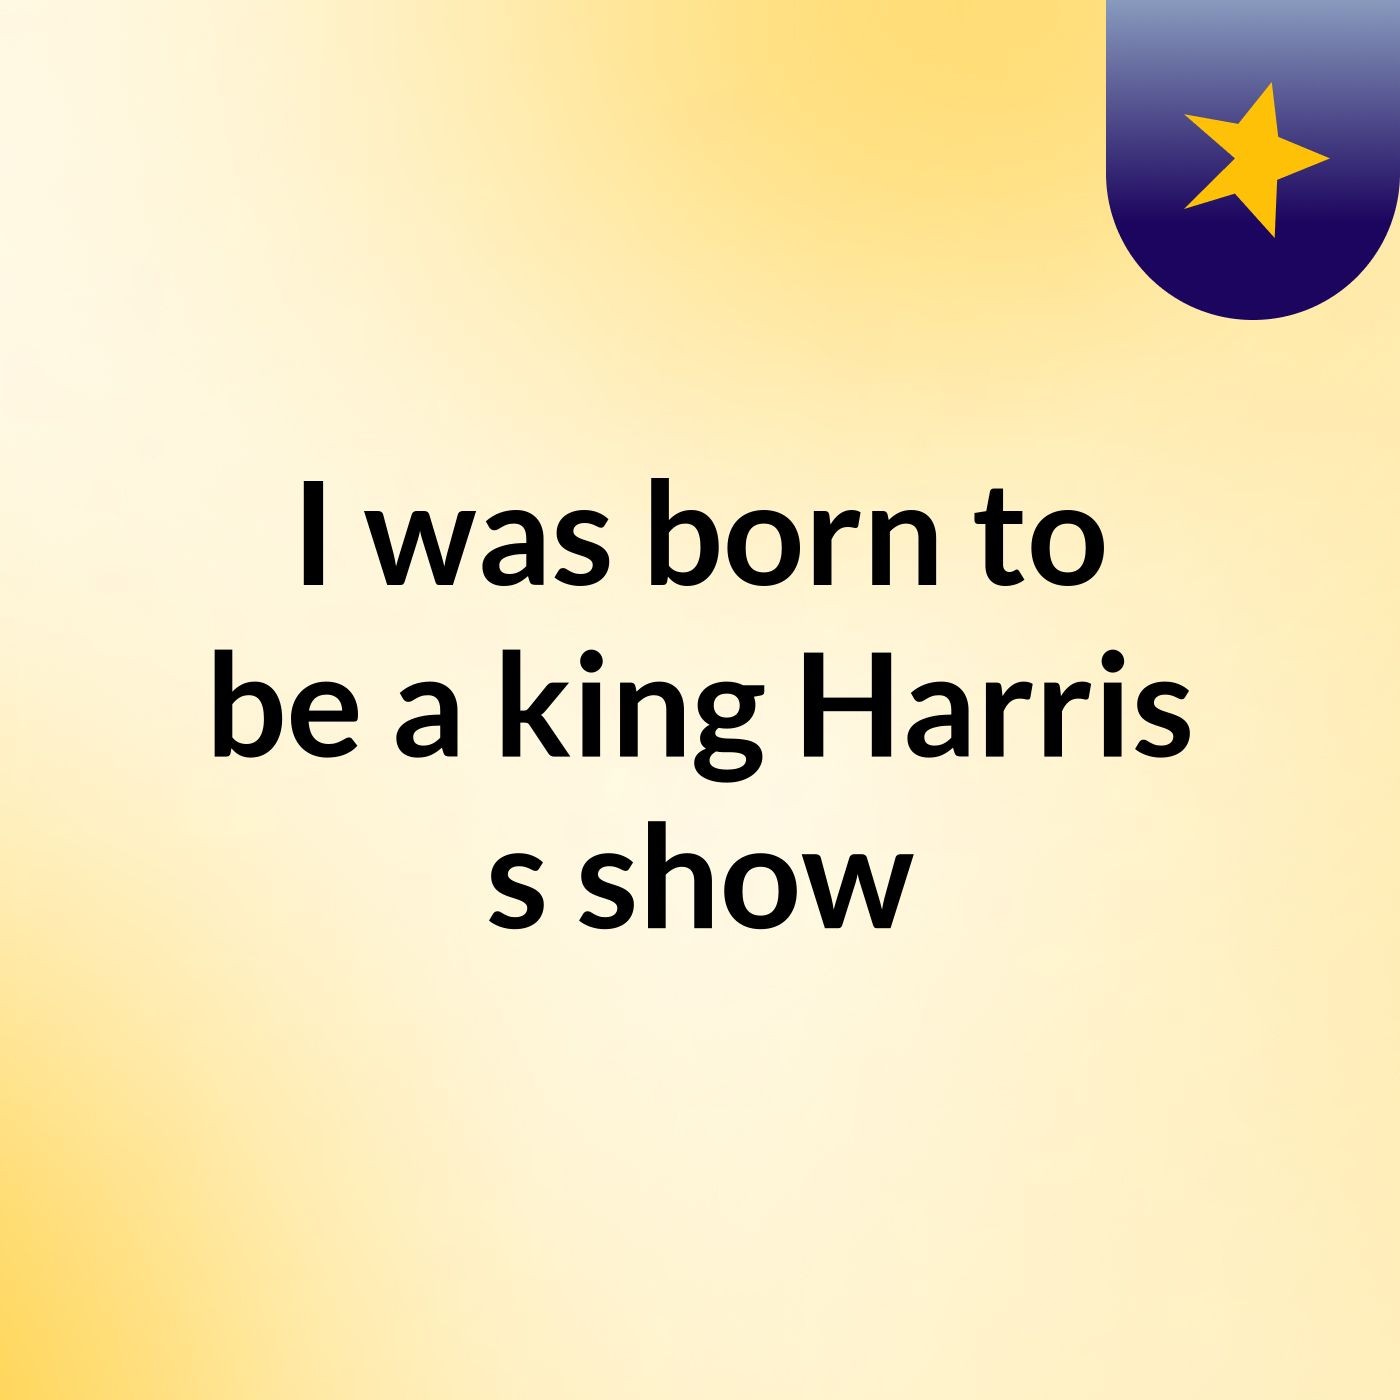 I was born to be a king Harris's show